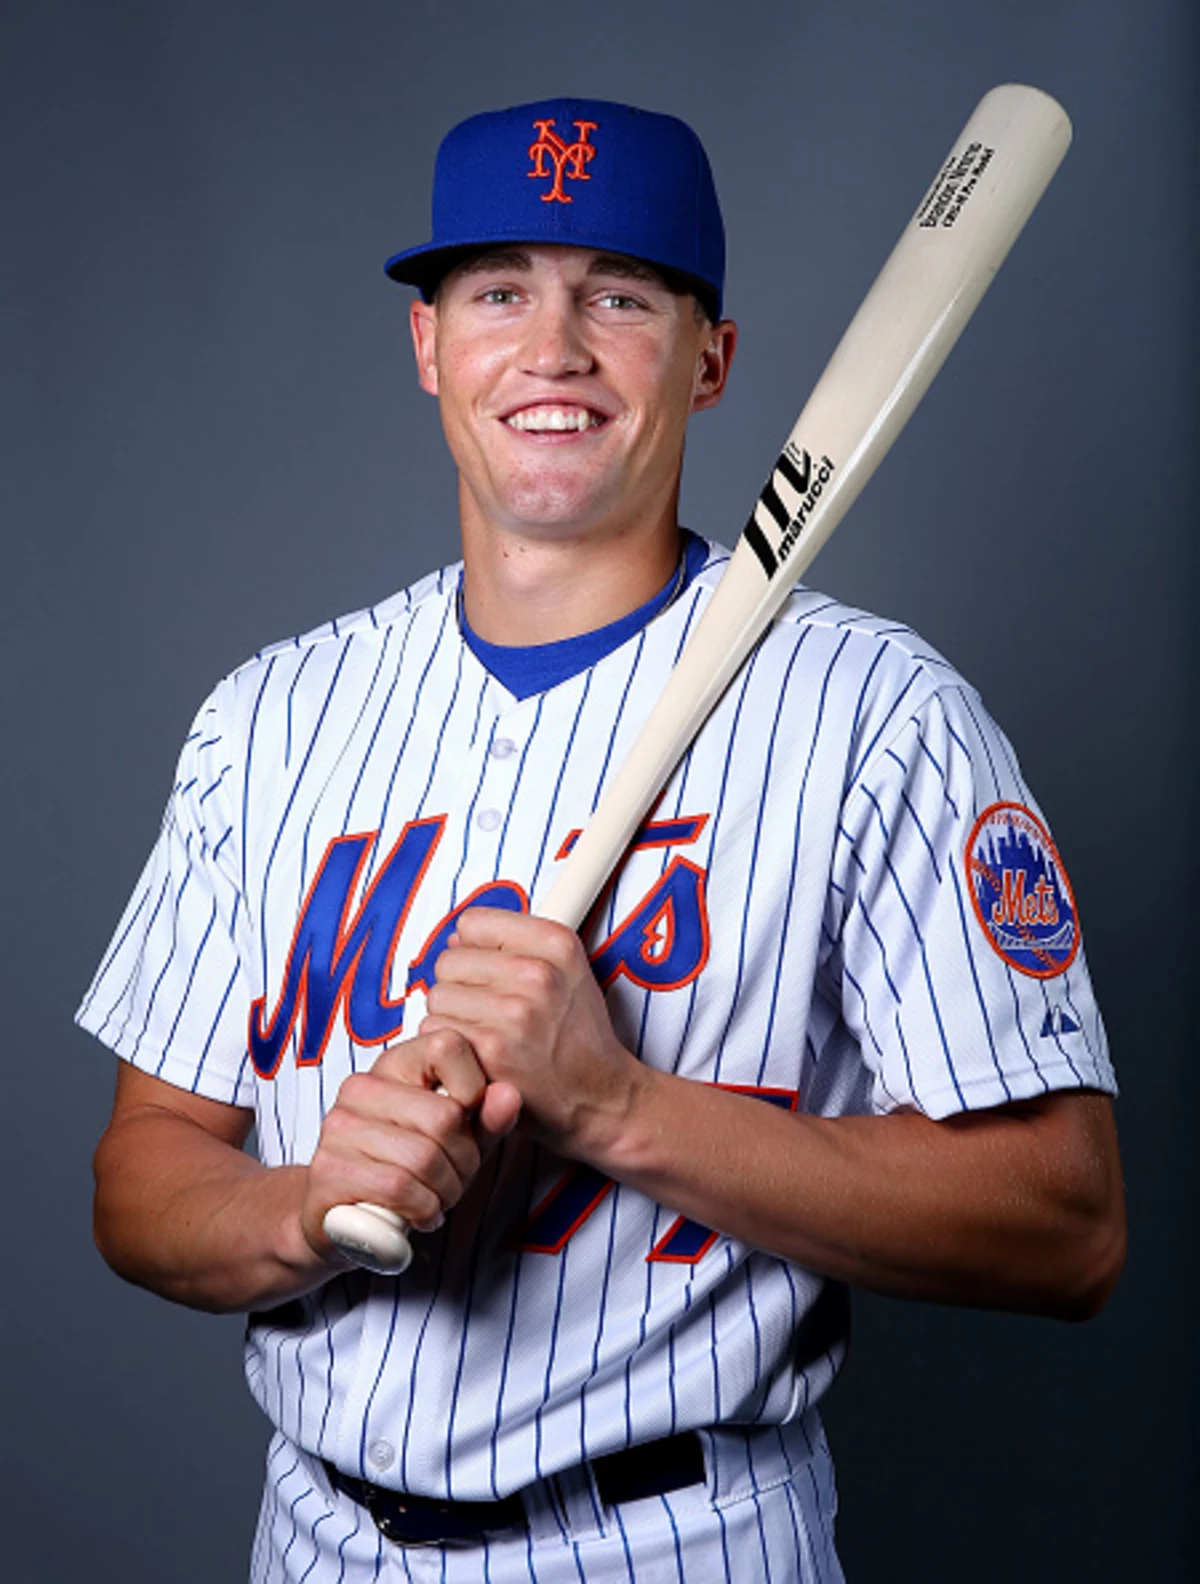 Cheyenne native Brandon Nimmo makes New York Mets' Opening Day roster, but  sits out due to neck issue - Cheyenne, WY Cap City News